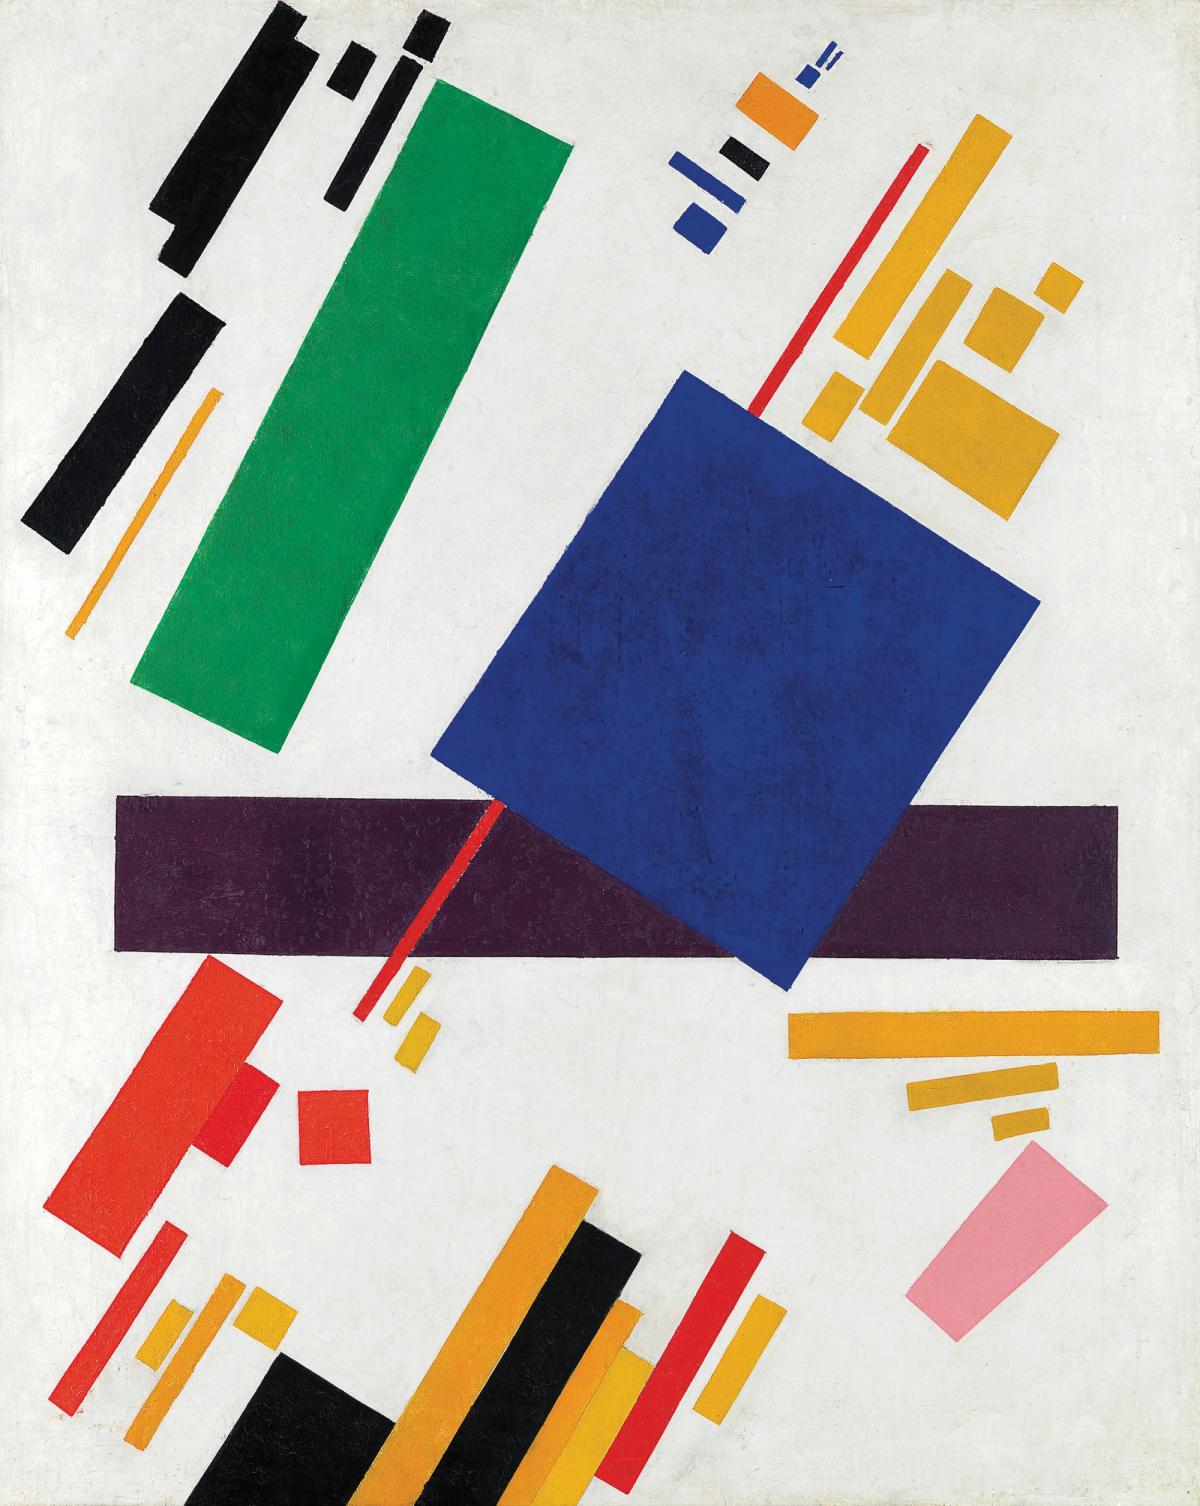 Kazimir Malevich's Suprematist Composition (1916), which made an artist record $85.8m at Christie's in May 2018 Christie's Images